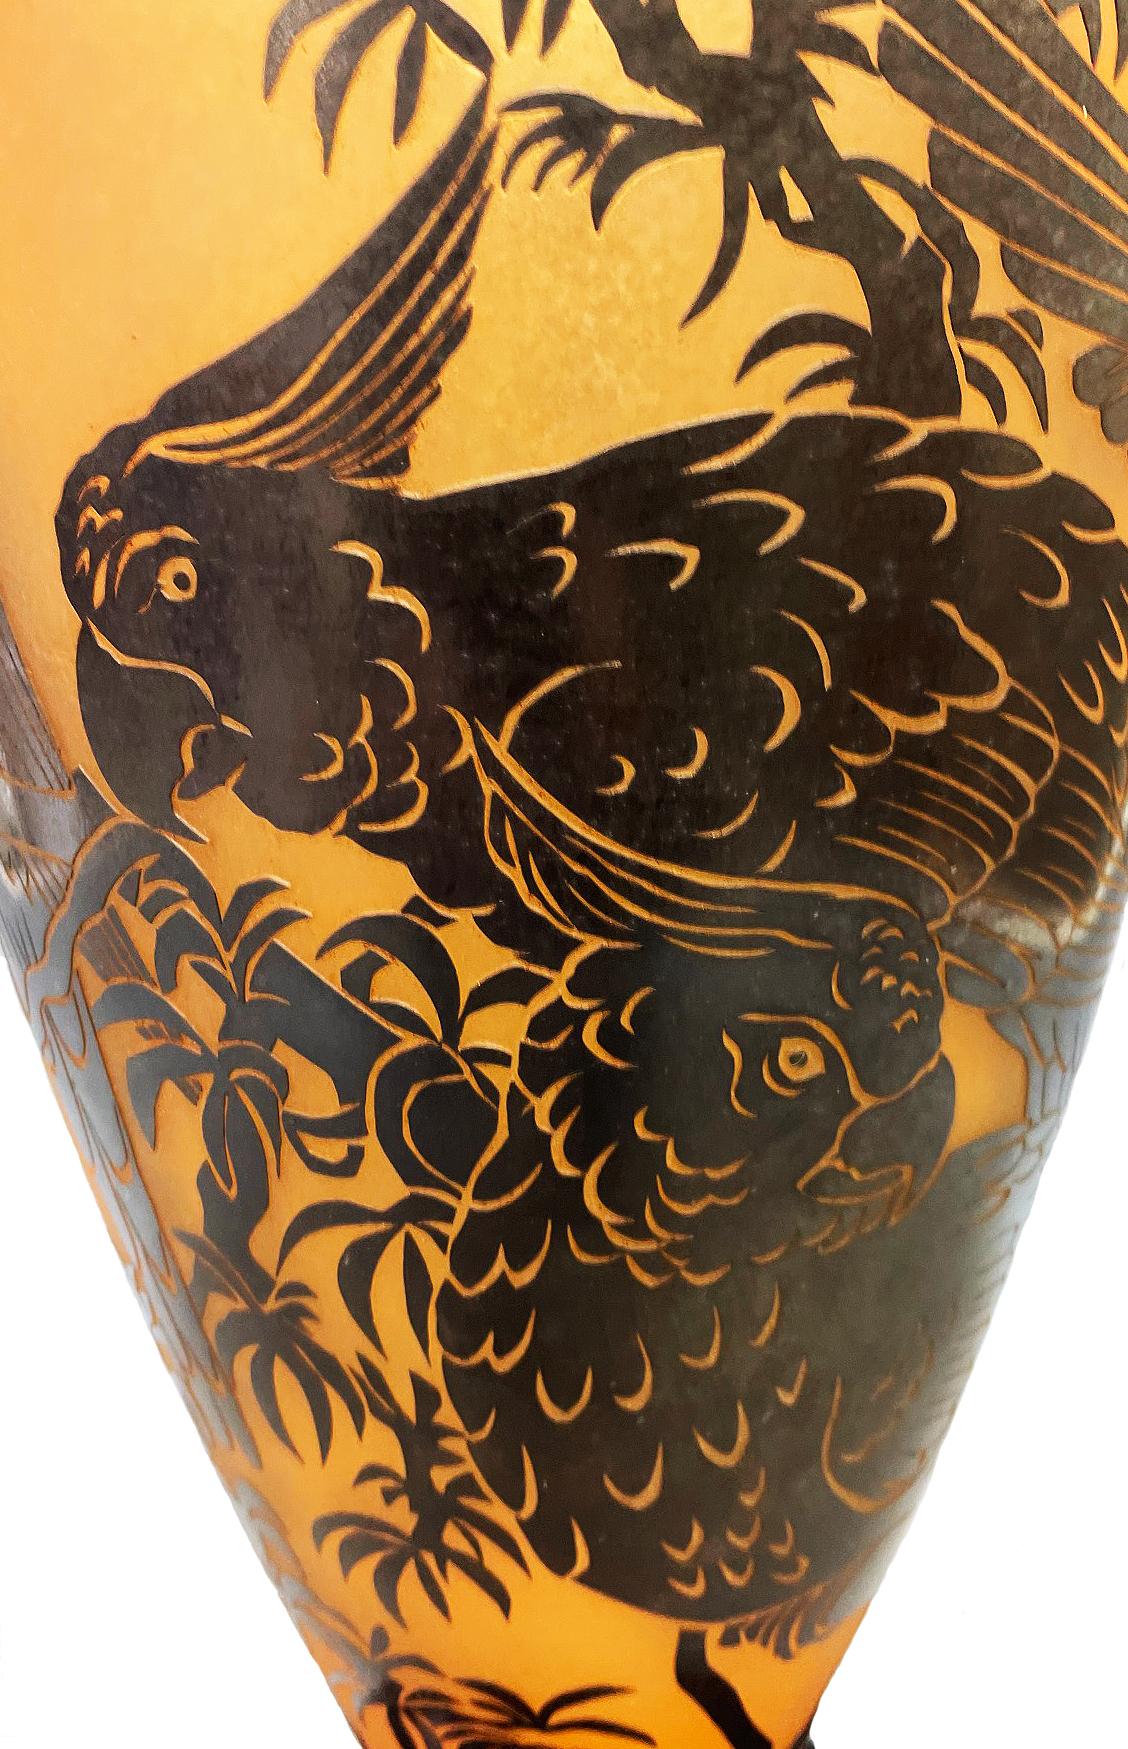 This cameo etched vase by Gary Genetti is incalmo and overlay blown glass. The original artwork is drawn, hand cut then pressure etched through layers of color to create the imagery. The piece consists of sections of layered colored glass partially